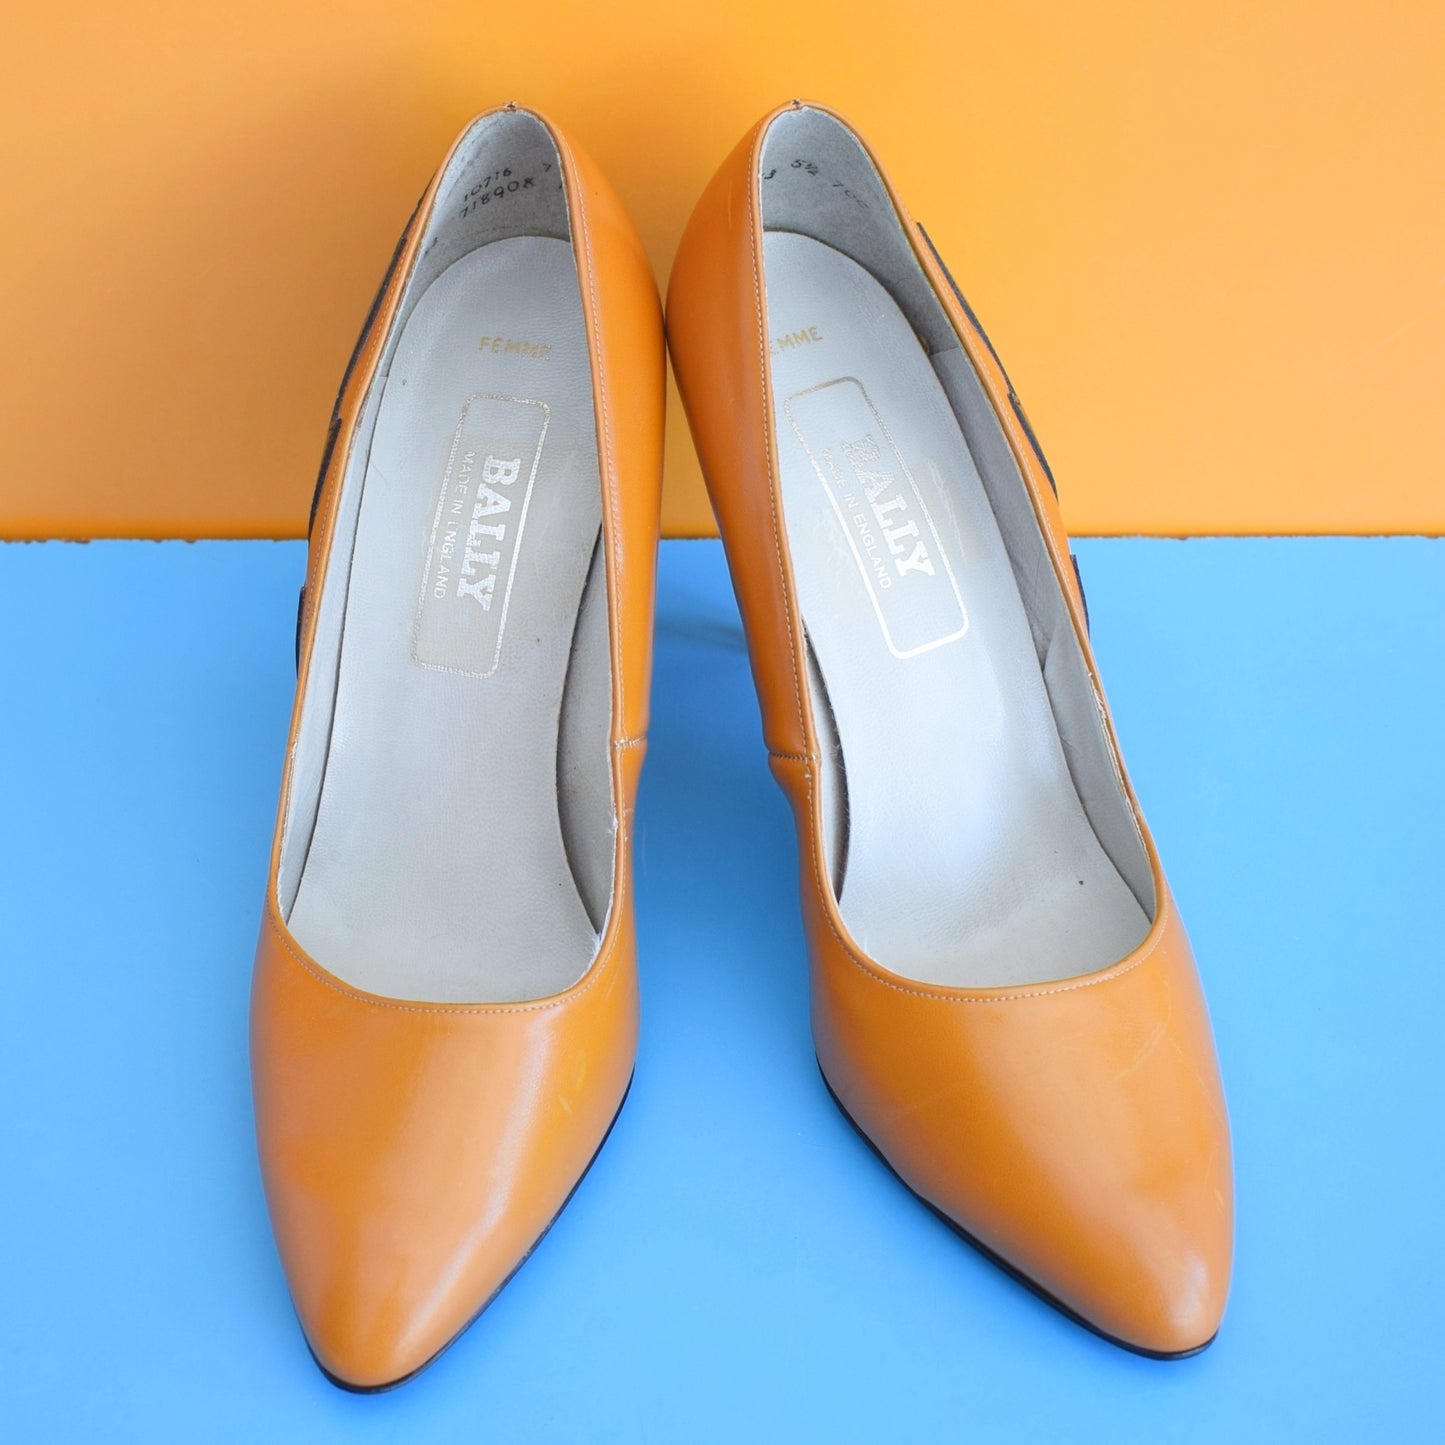 Vintage 1980s Leather Bally Shoes - Size 5.5 Heels